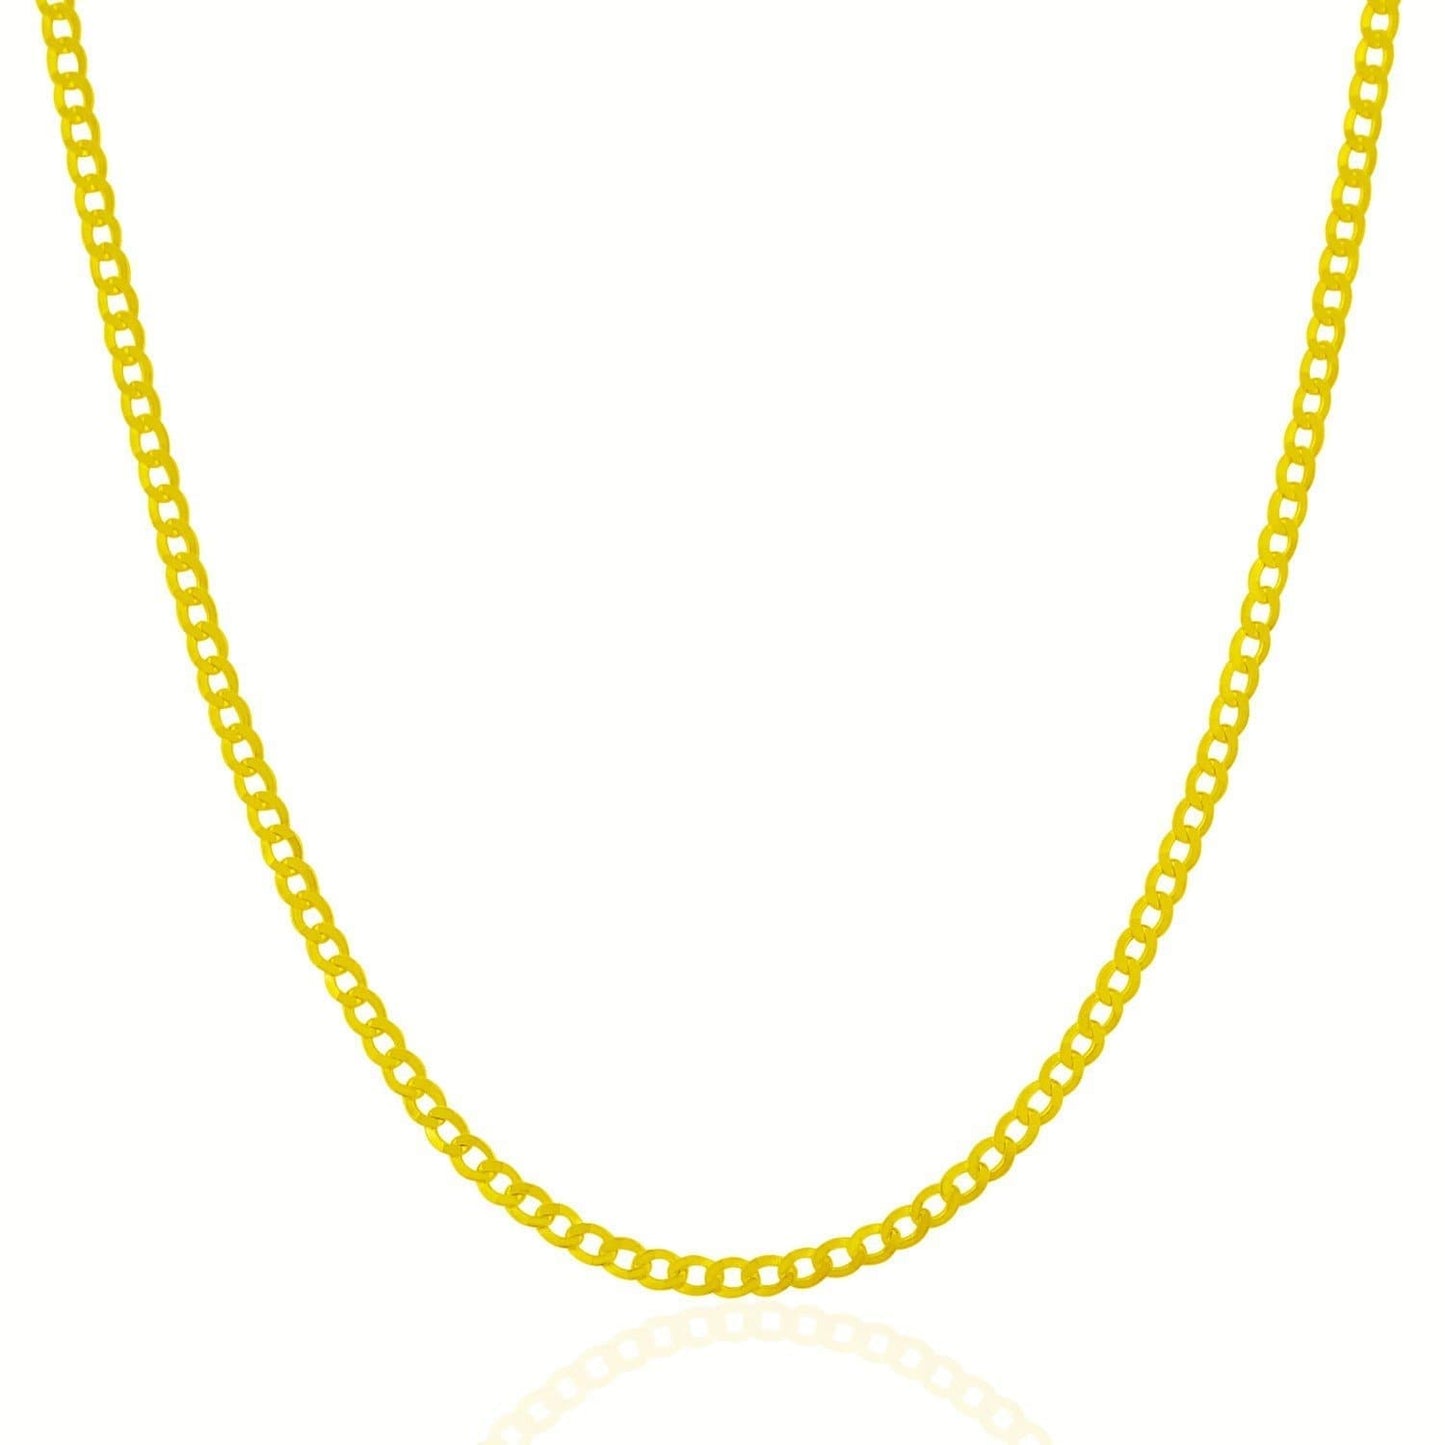 10k Yellow Gold Curb Chain in 2.4 mm